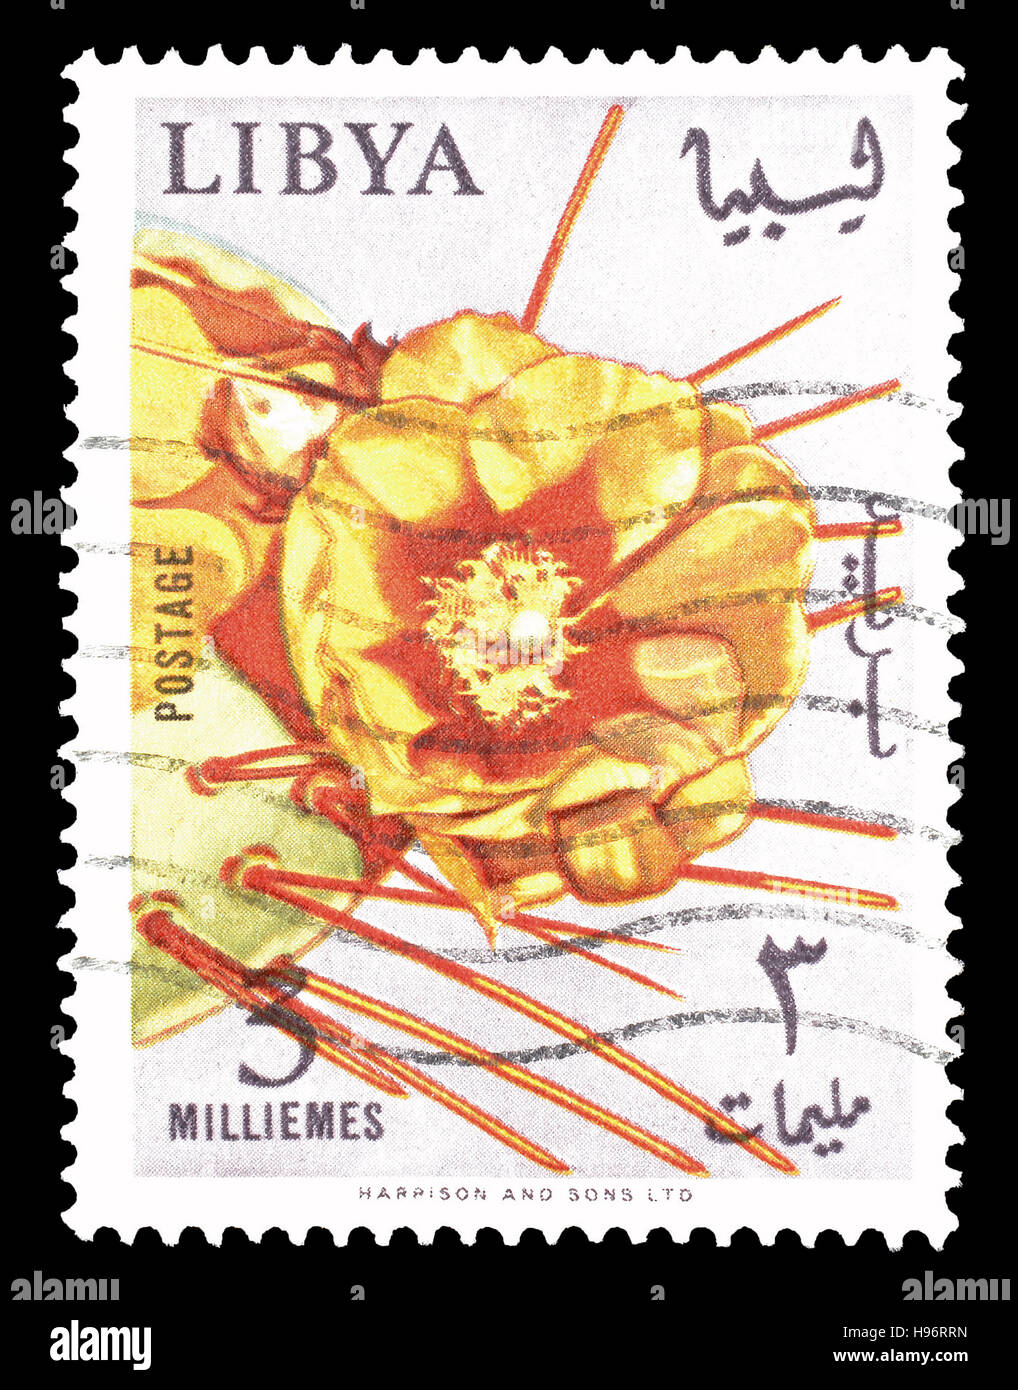 Cancelled postage stamp printed by Libya, that shows Spineless cactus. Stock Photo